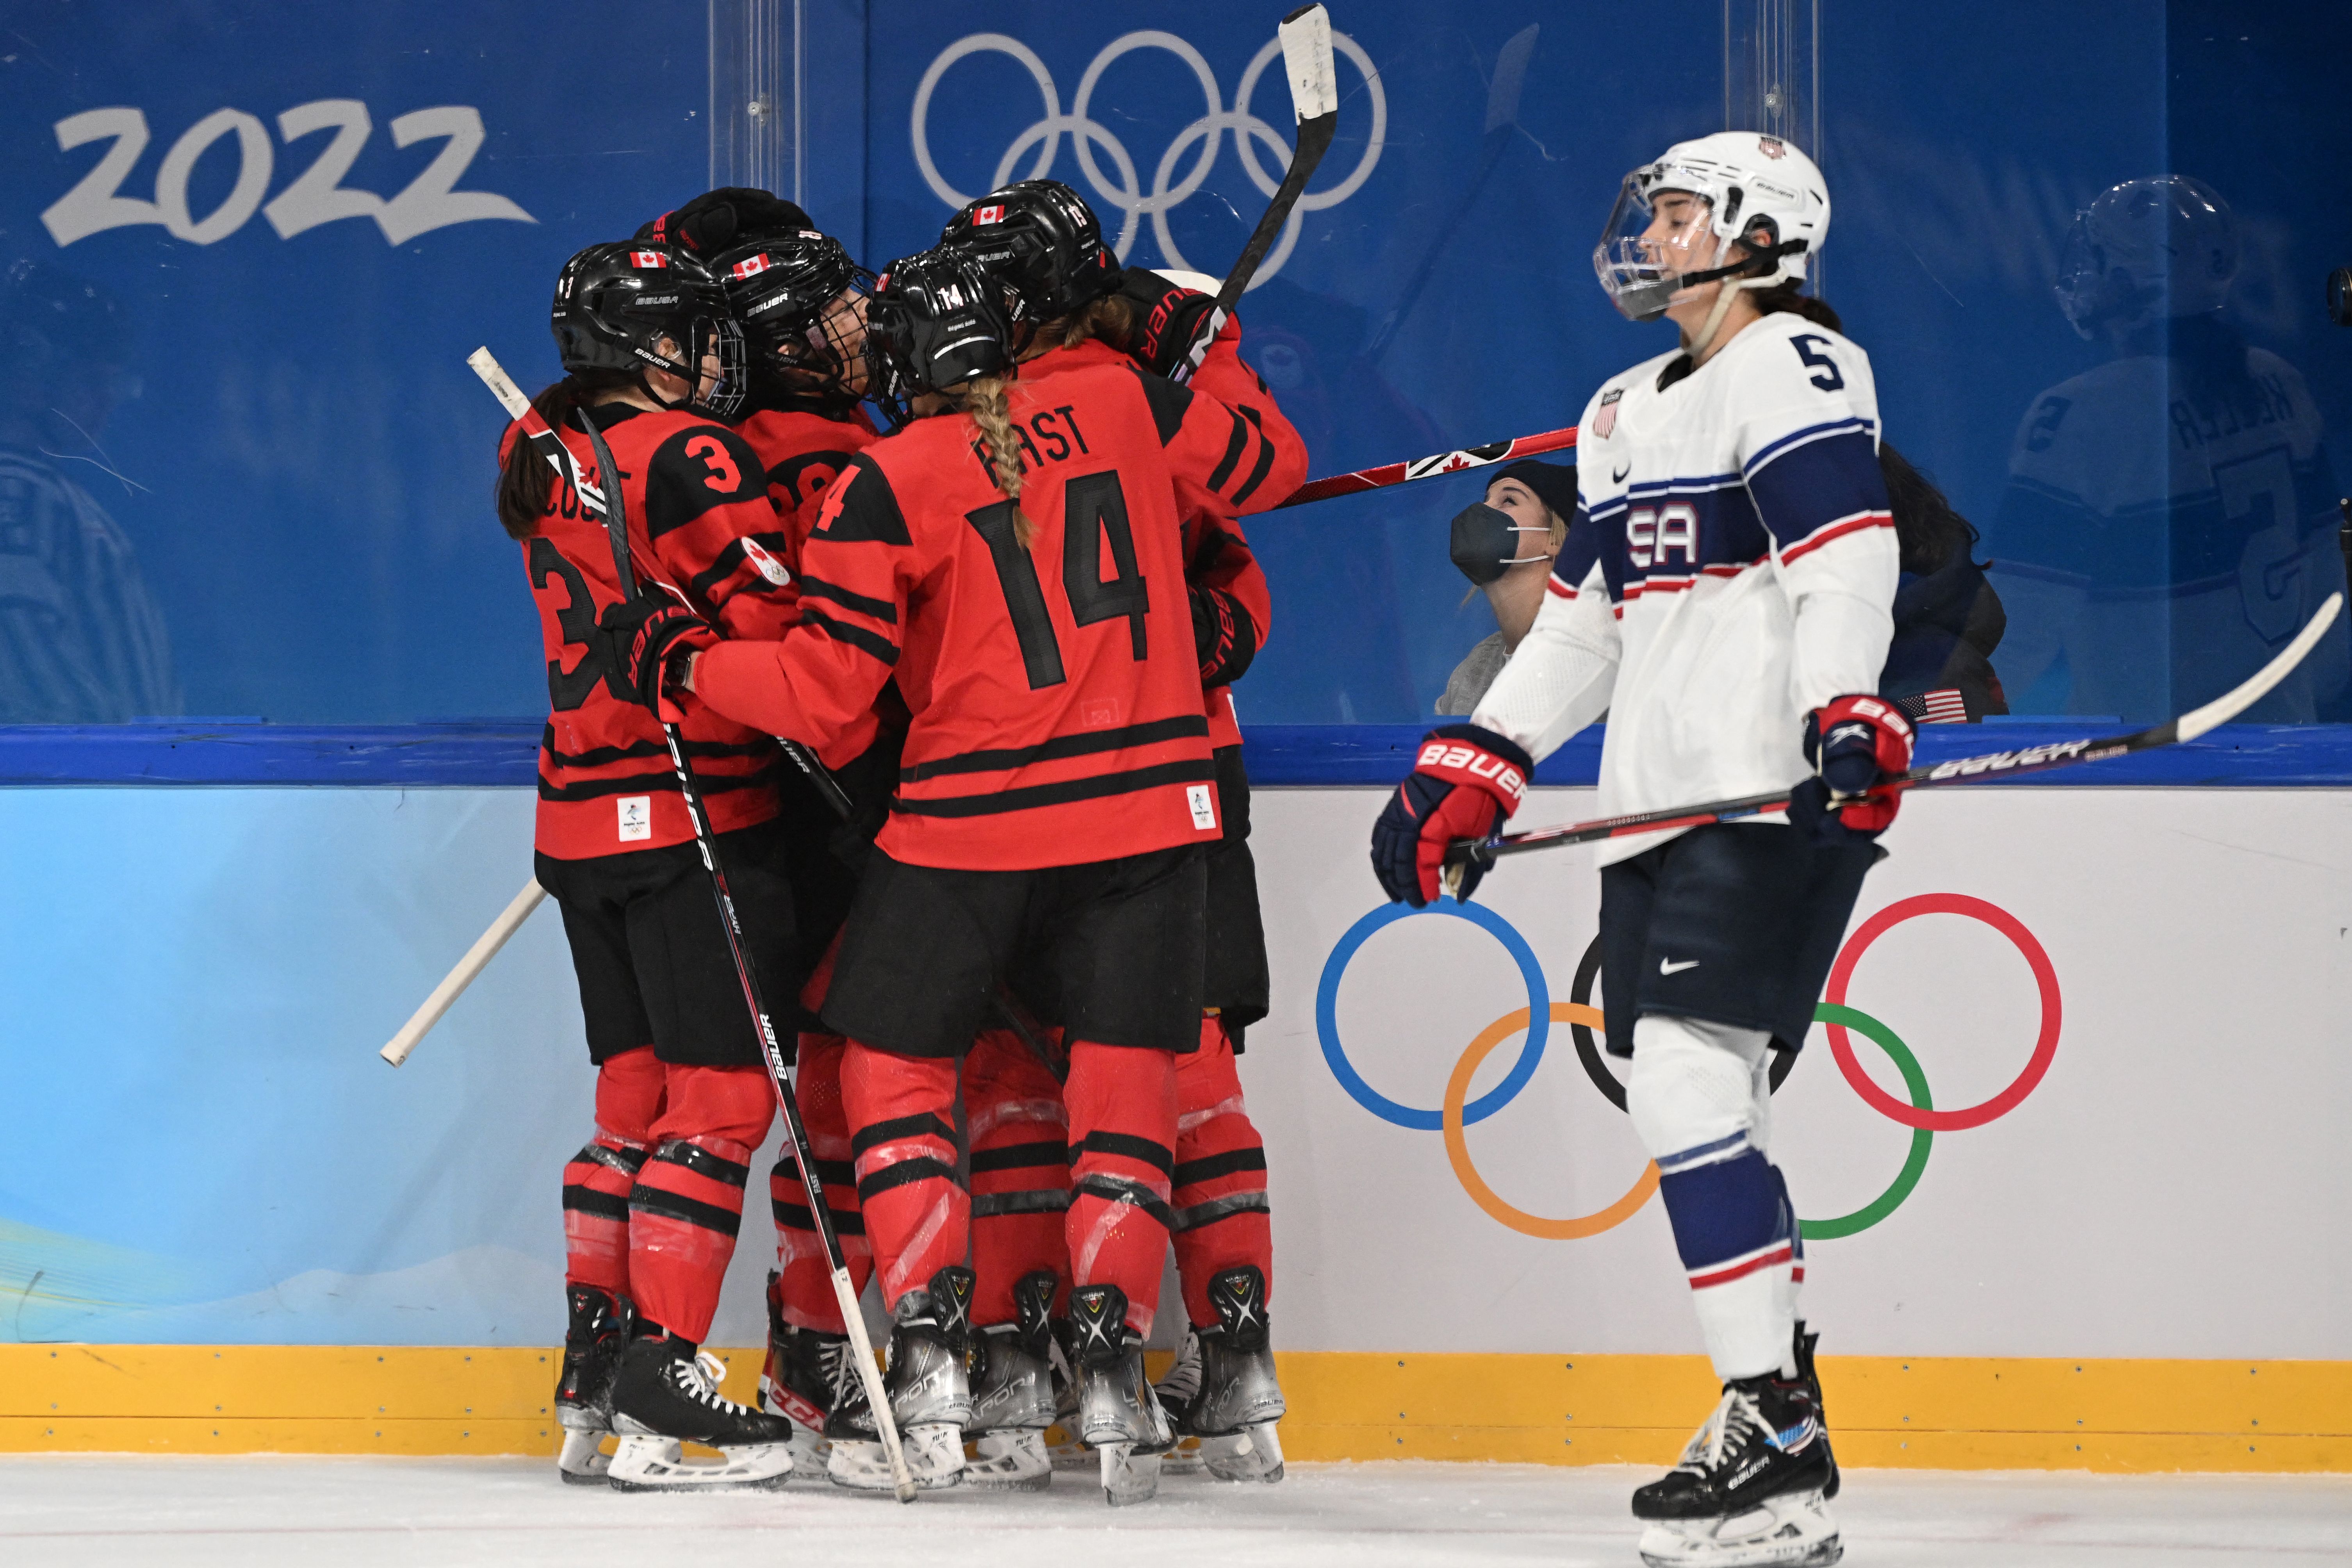 Canada to Hold off USA to Win Women's Hockey Gold Medal at the 2022 Winter Olympics thumbnail